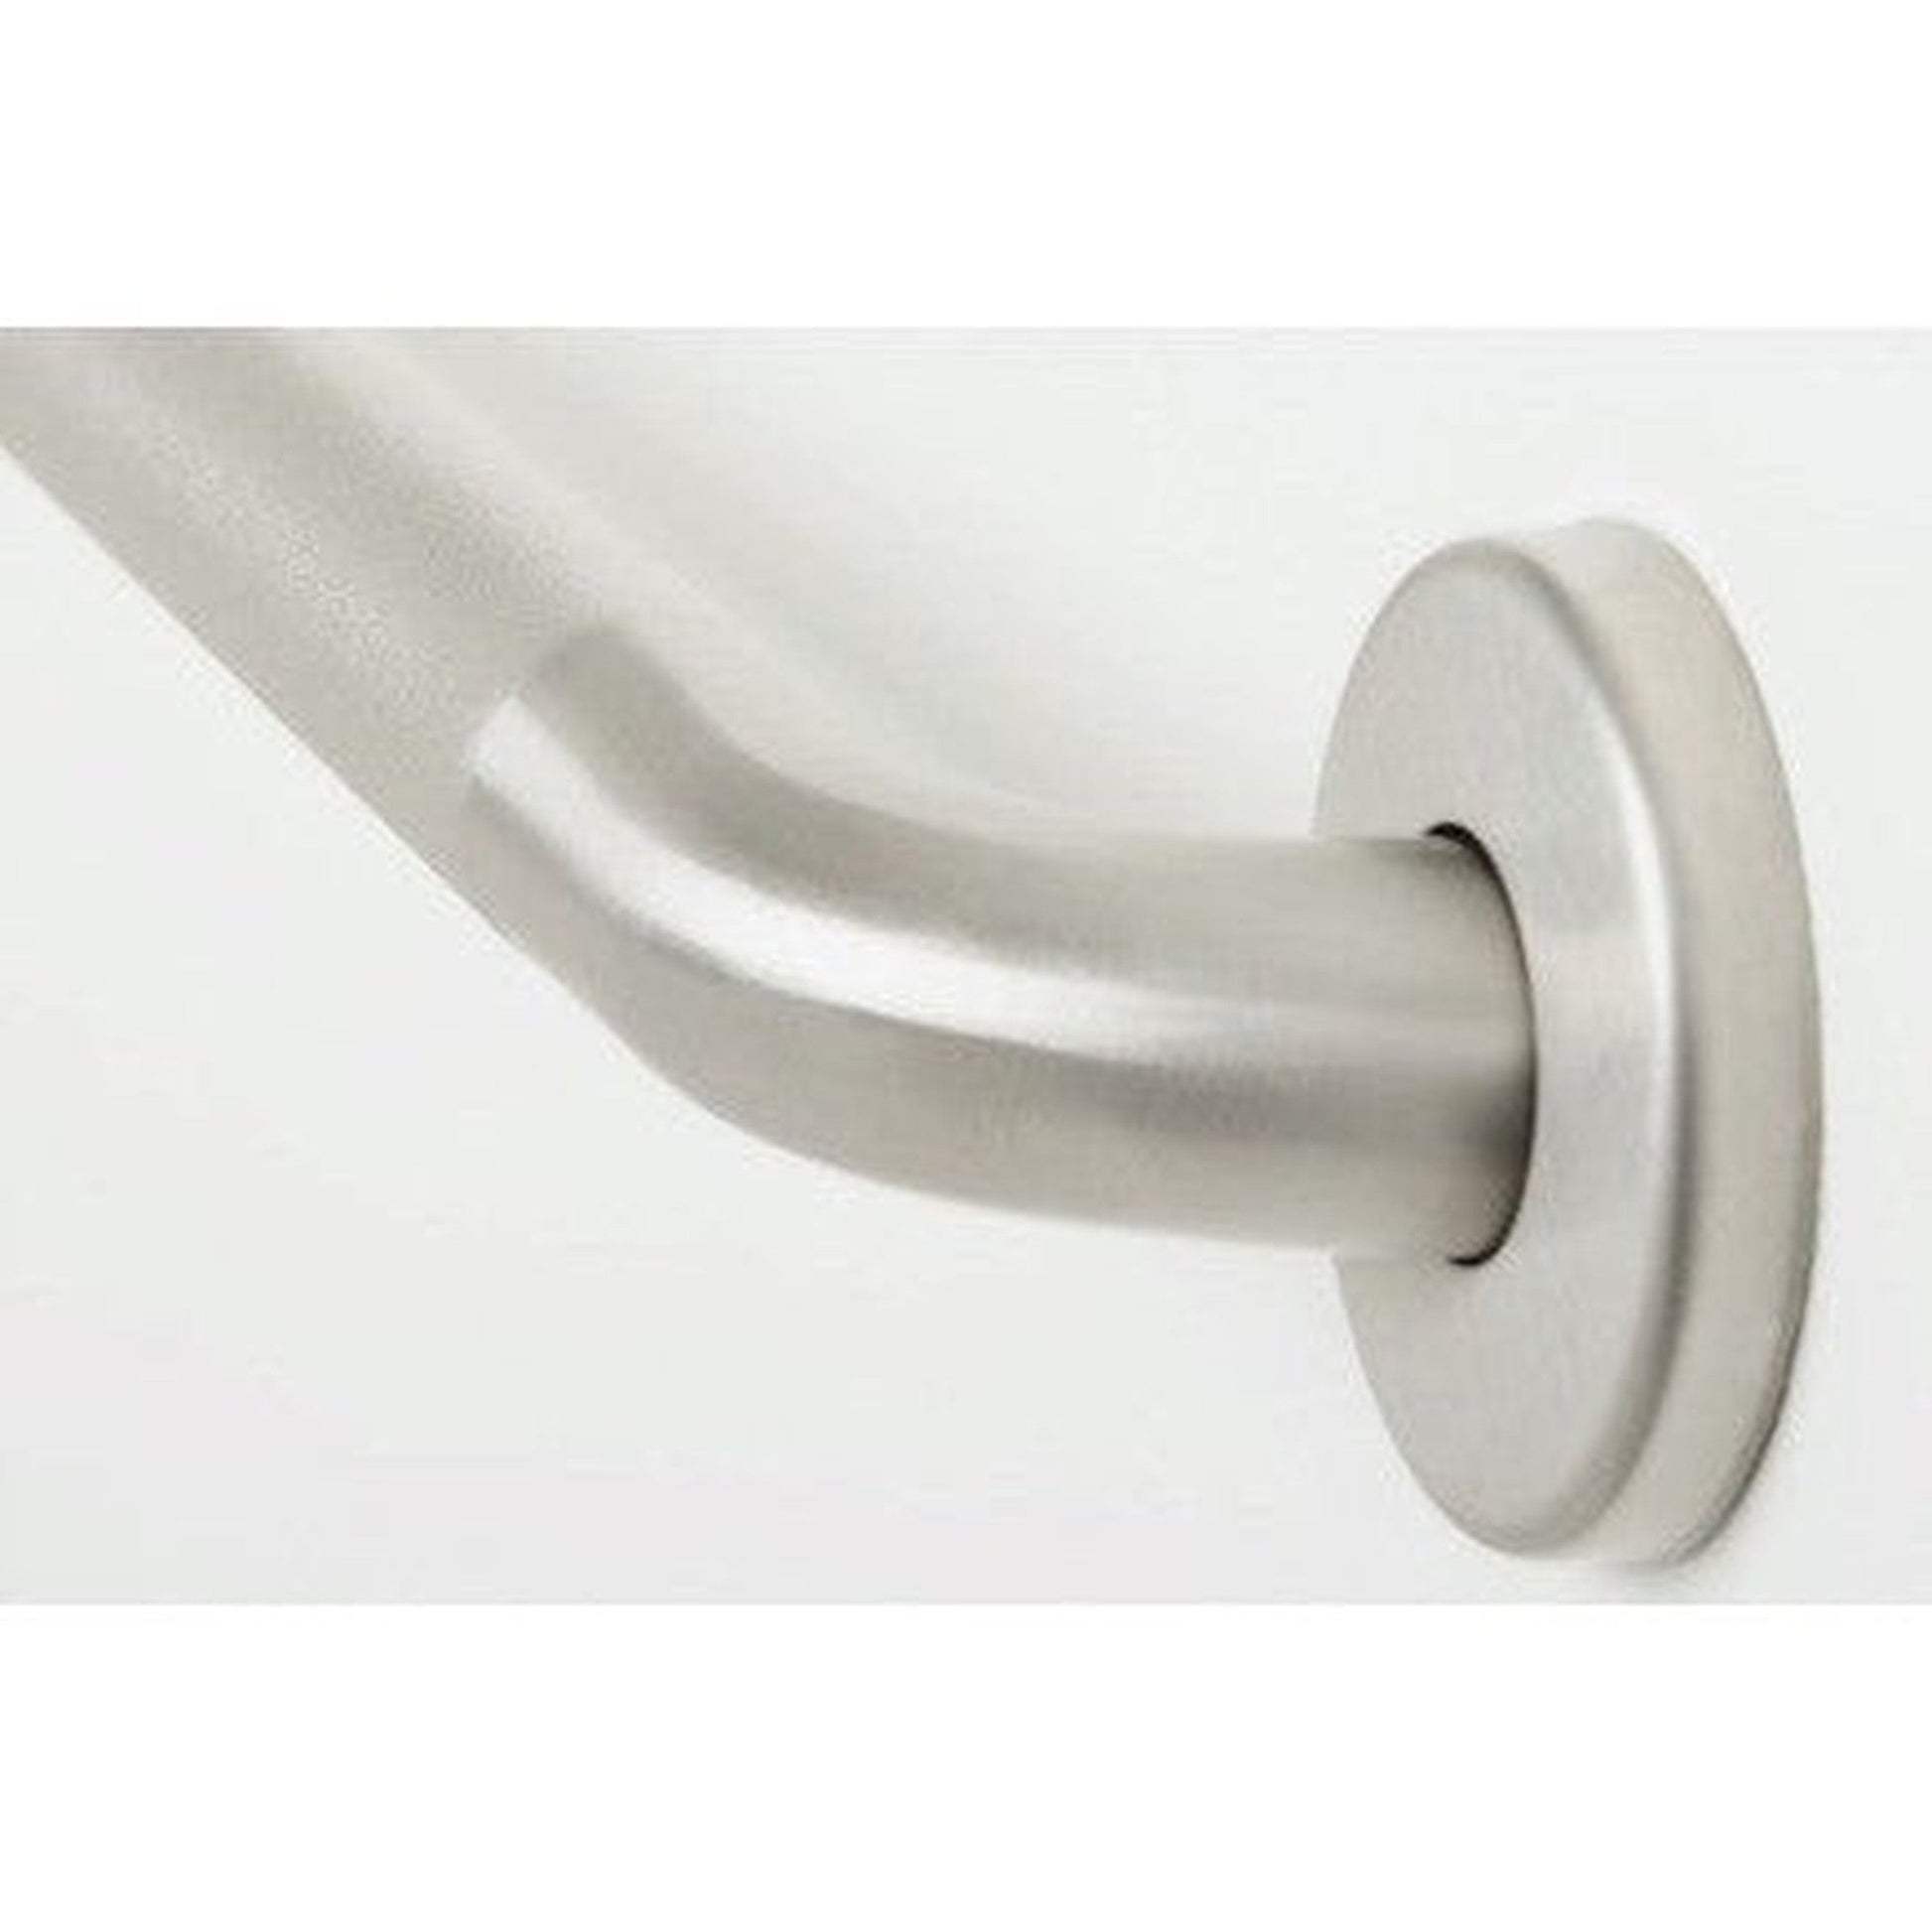 Seachrome Signature GY Series 18" Peened With Satin Stainless Steel Ends 1.25" Tube Diameter Straight Grab Bar